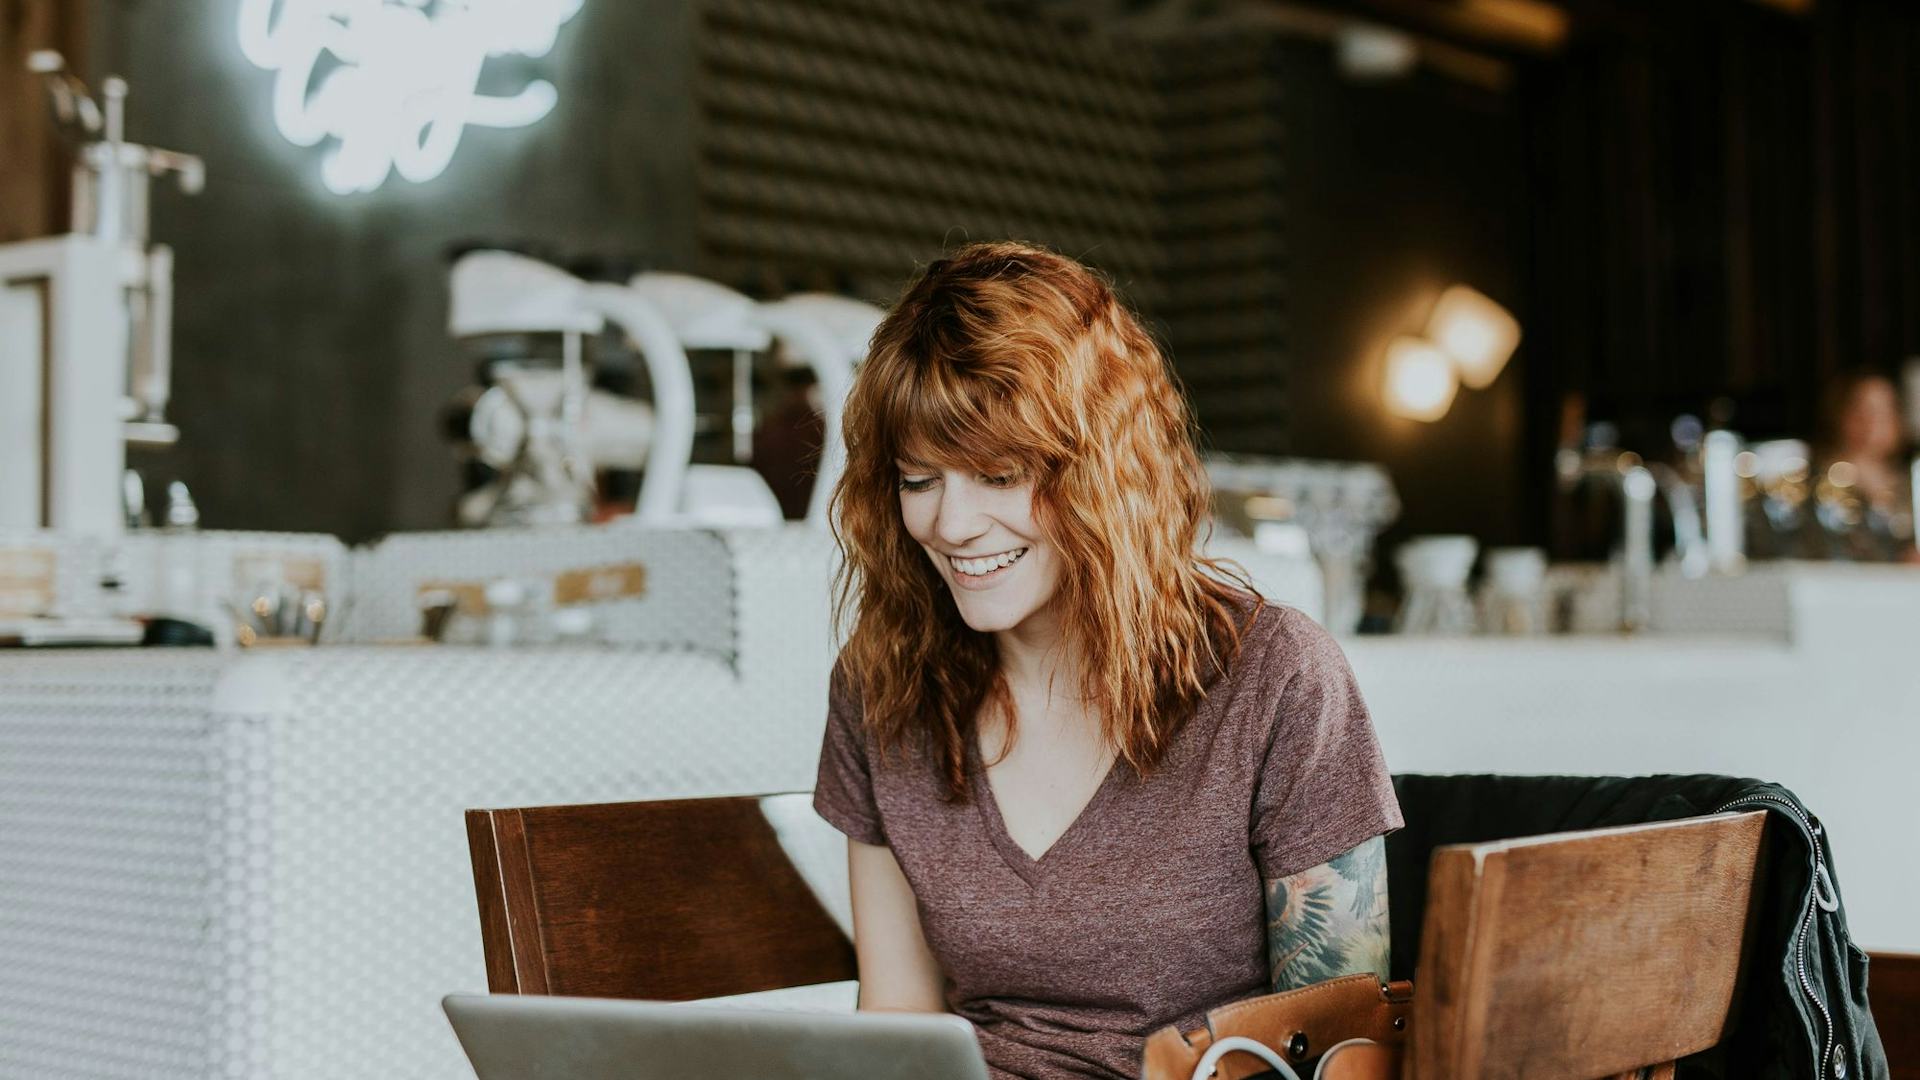 woman looking at laptop and smiling